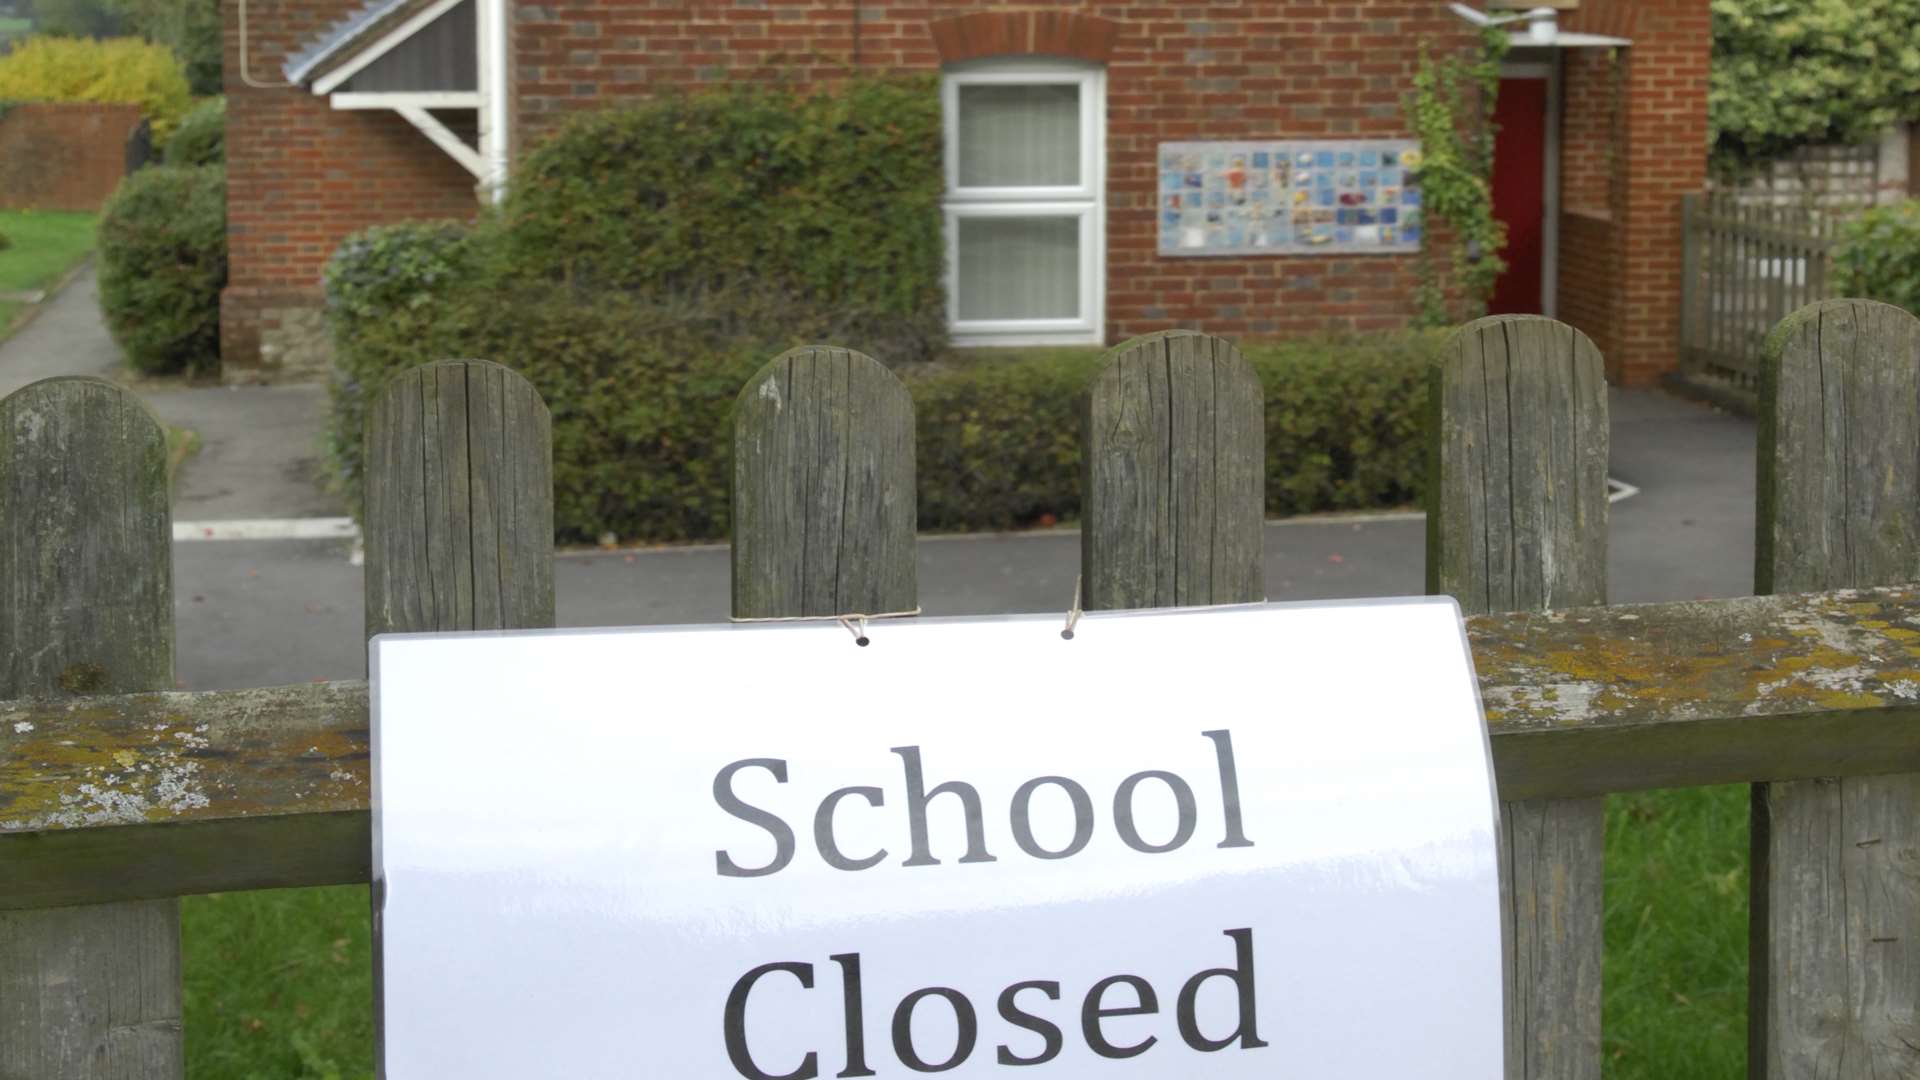 Offham Primary School closed as a mark of respect to the popular teacher.